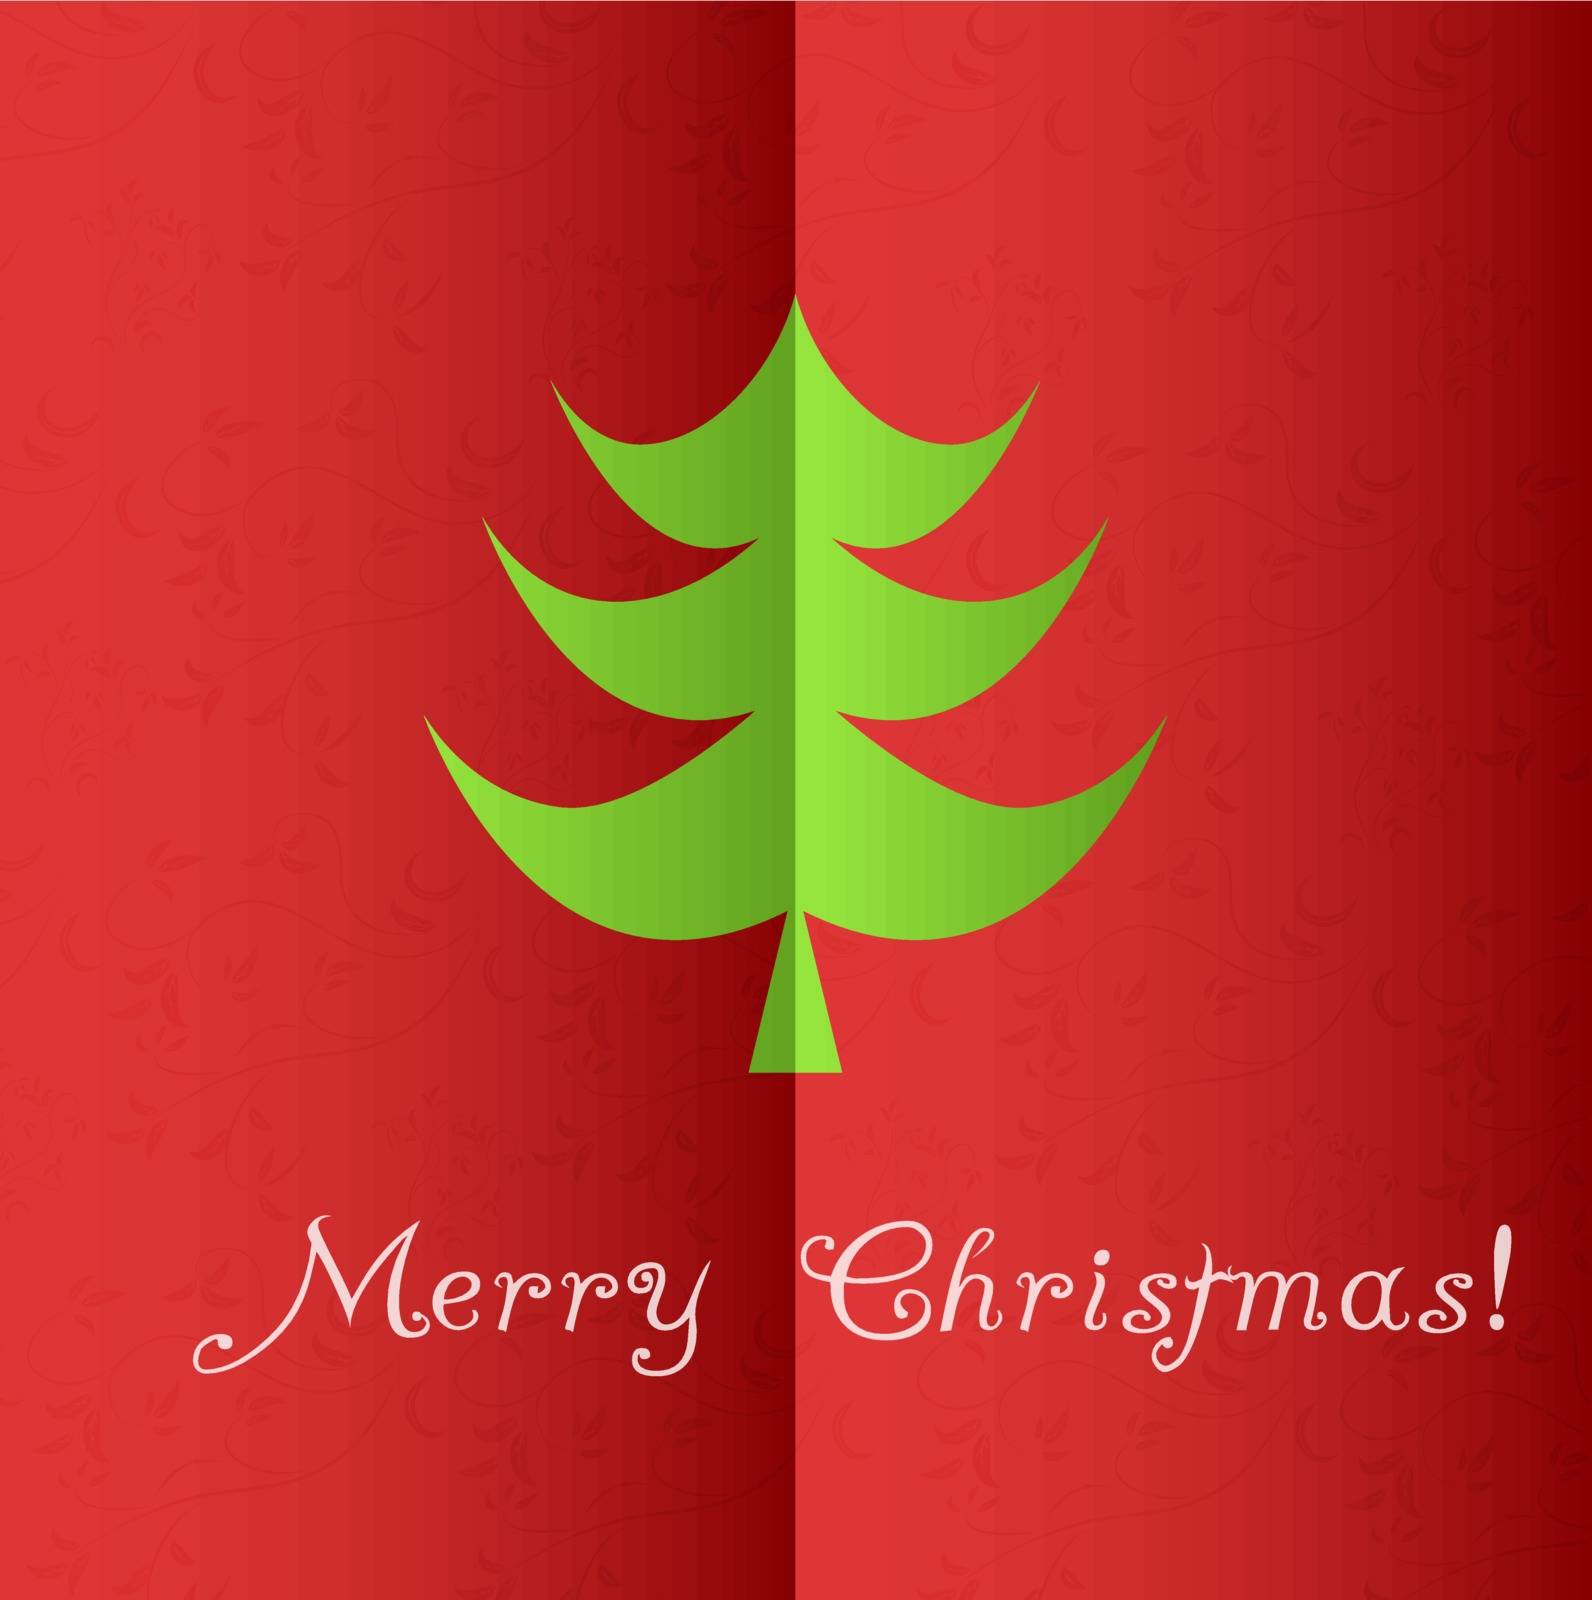 Christmas tree applique vector background by provinc